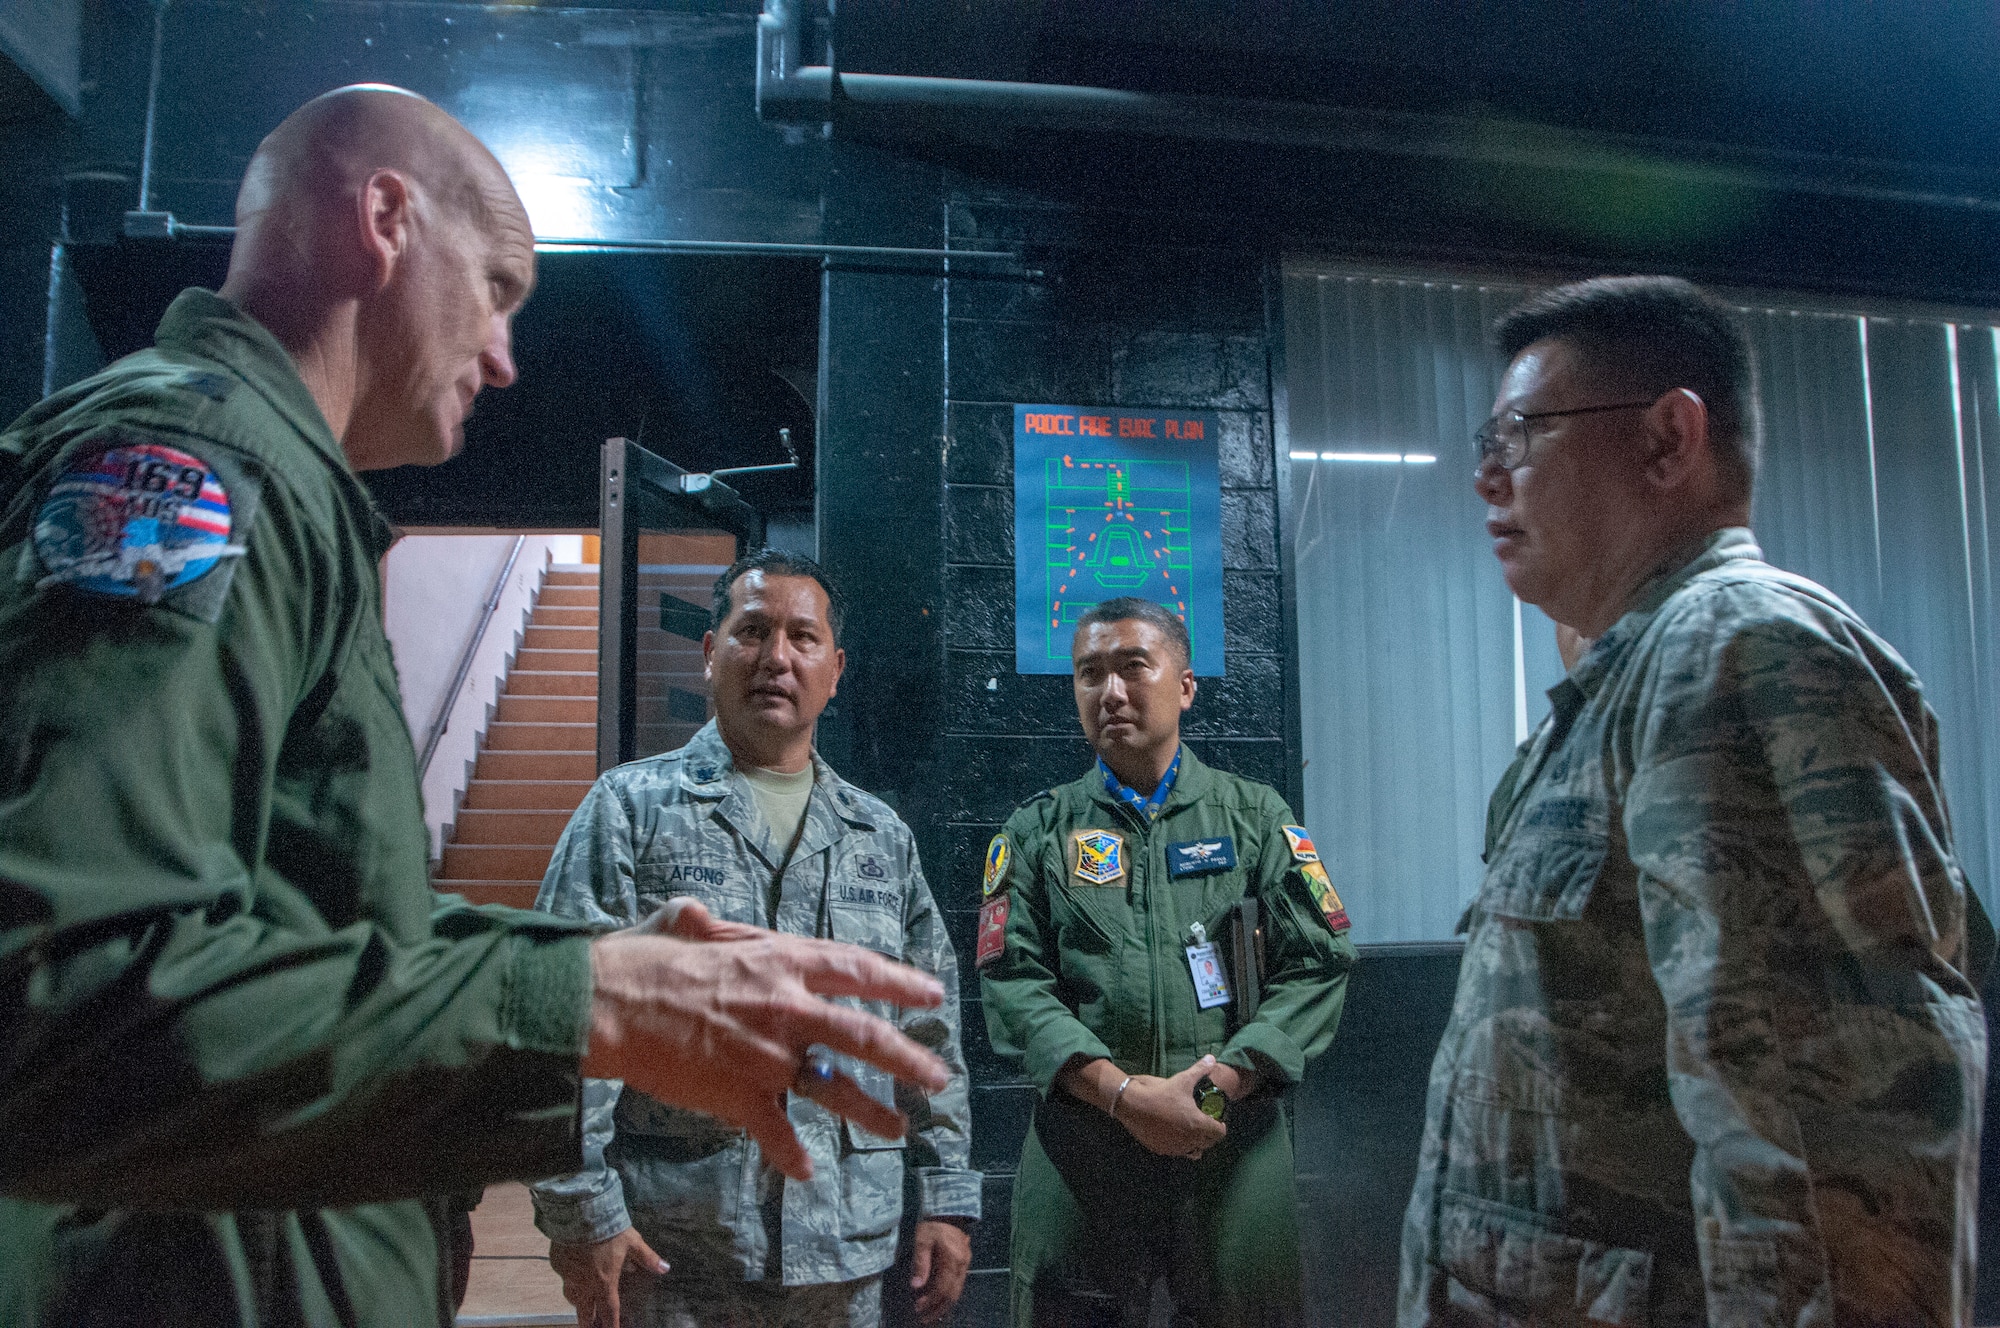 Maj. Gen. James O. Eifert, Air National Guard Assistant to the Commander, Pacific Air Forces leads a discussion on air defense concepts during a visit to the Philippine Air Defense Control Center